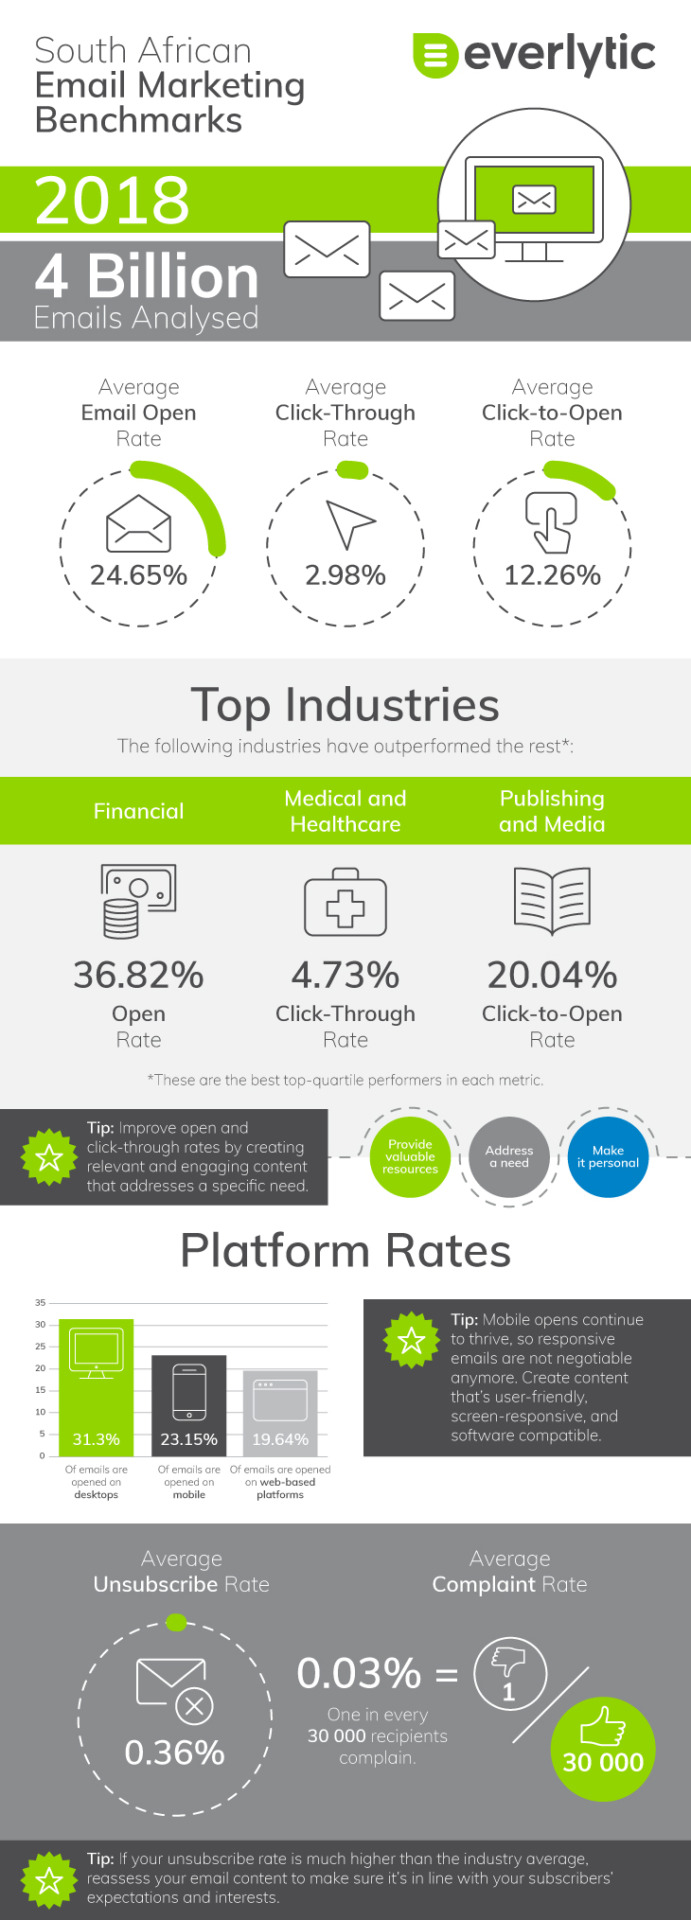 Everlytic | Benchmarks 2018 | Infographic | Email Marketing | Statistics | Click rate | Click-through rate | Click-to-Open rate | Unsubscribe rate | South Africa